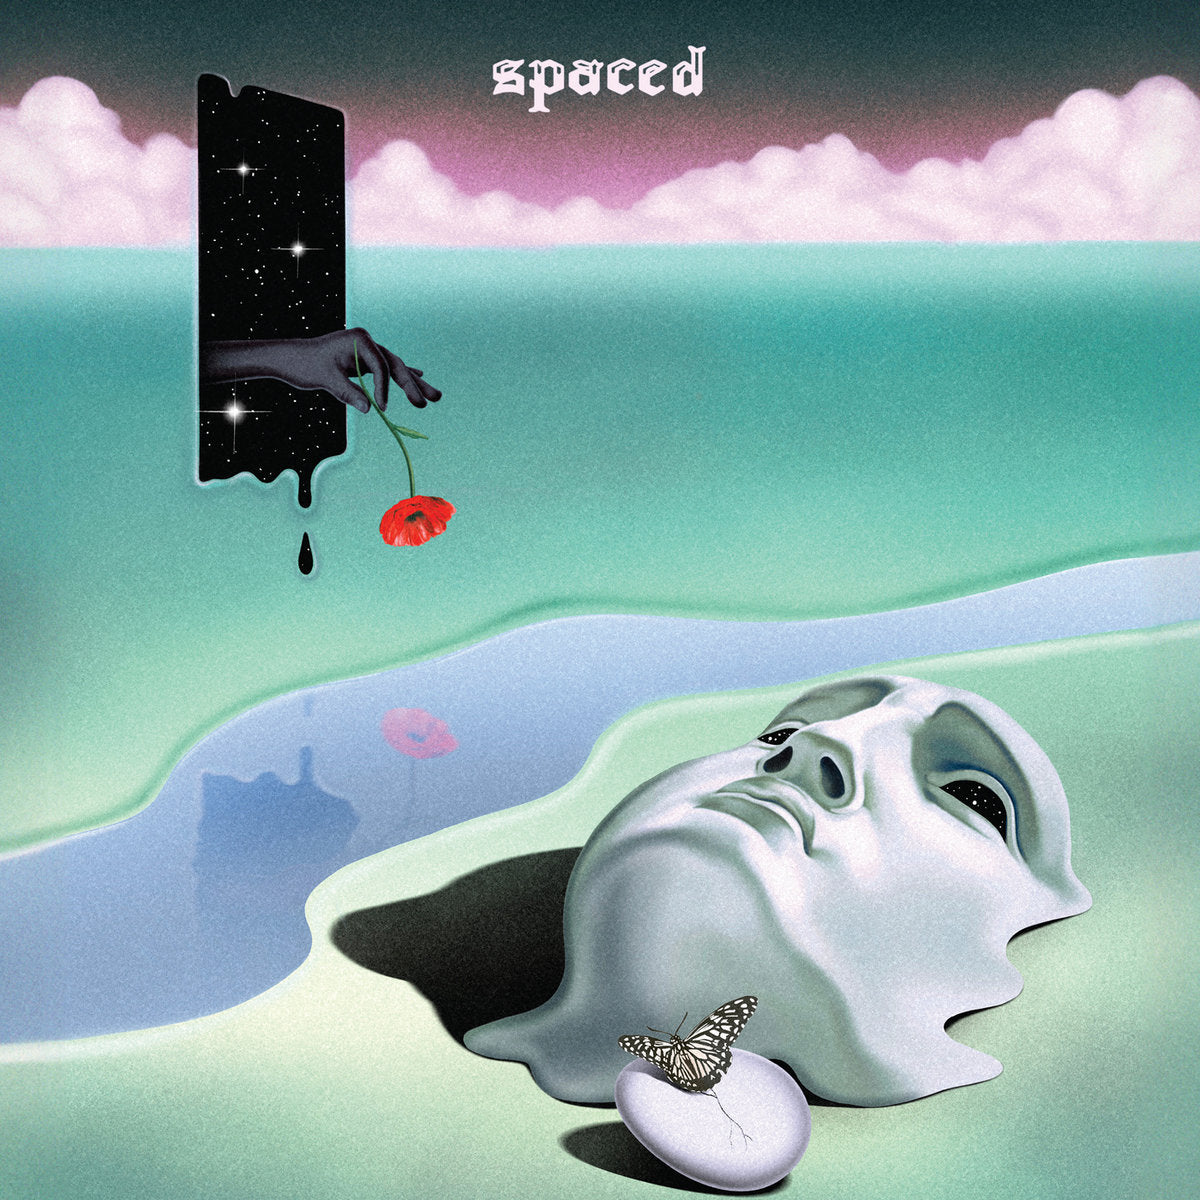 Spaced "This Is All We Ever Get" EP